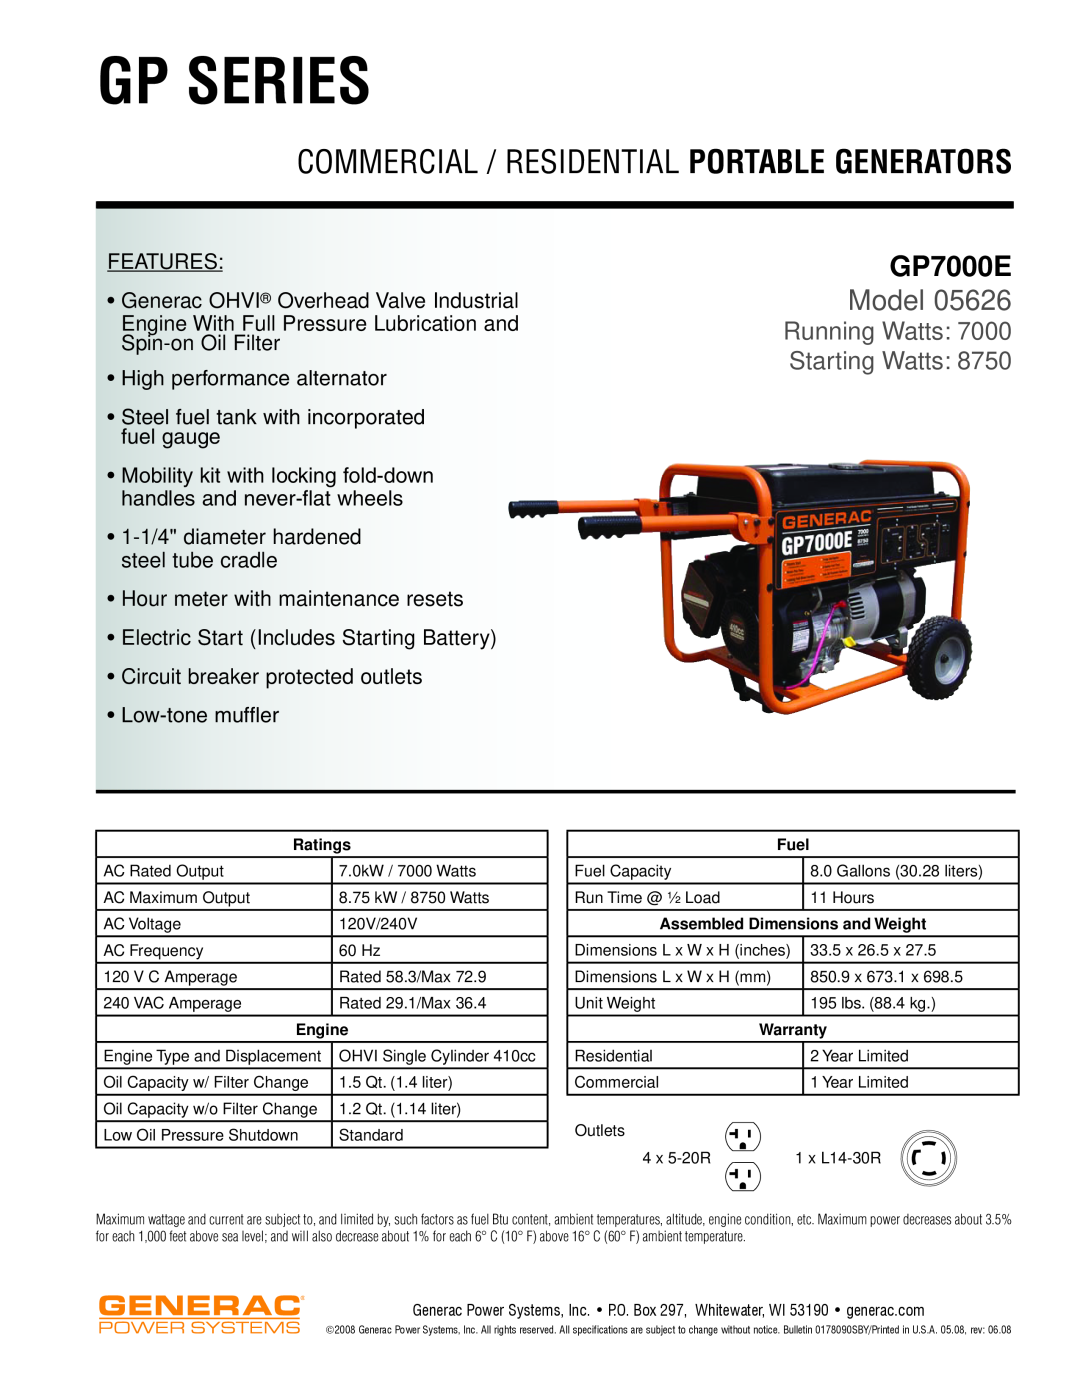 Generac Power Systems 5626 dimensions Gp Series, Commercial / Residential Portable Generators, GP7000E, Model 